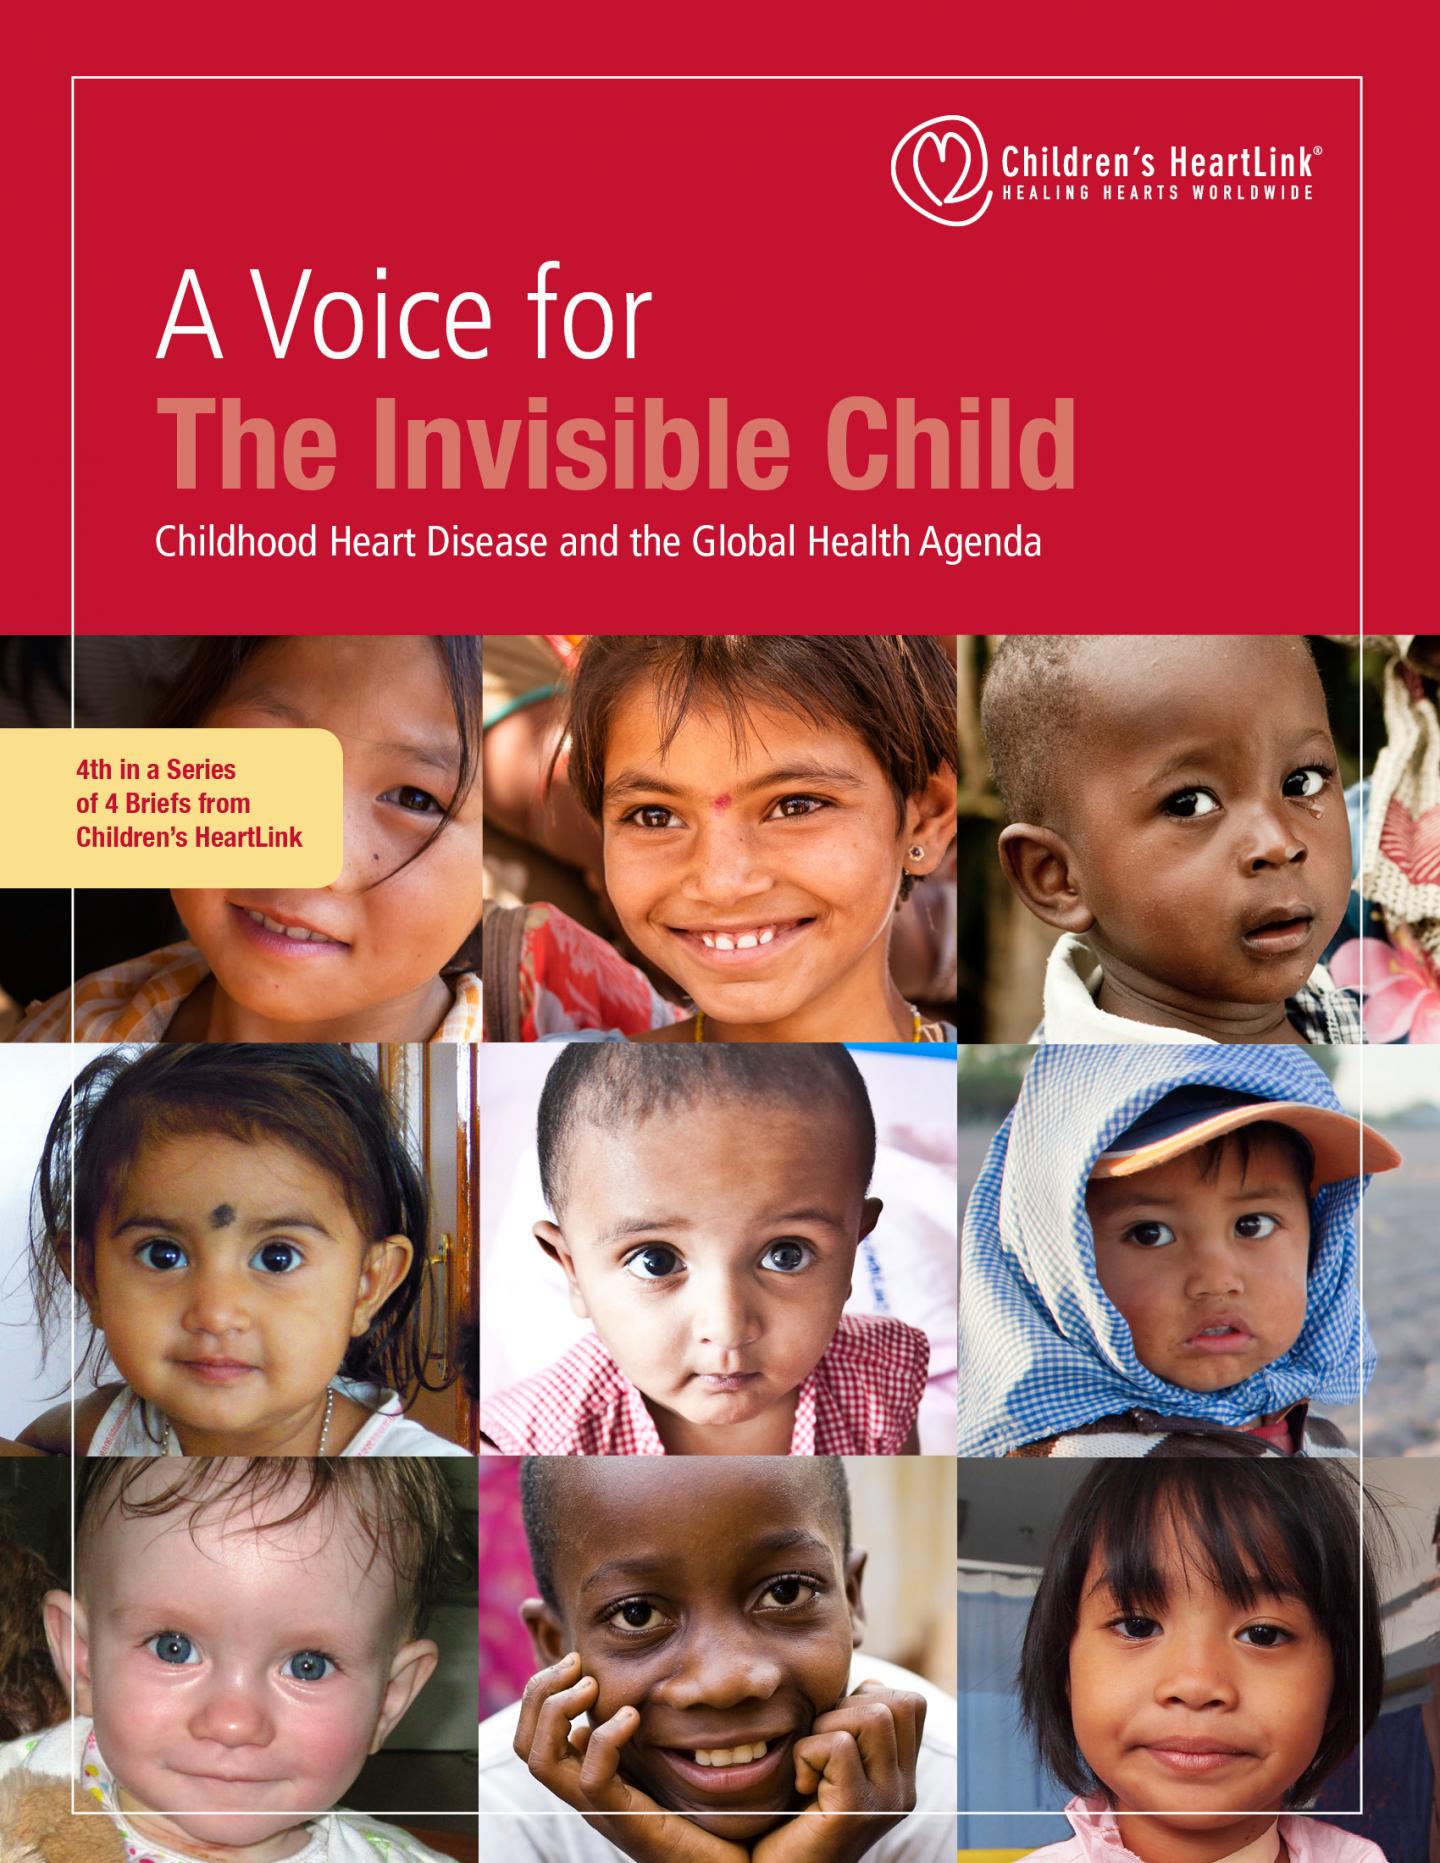 A Voice for The Invisible Child: Childhood Heart Disease and the Global Health Agenda